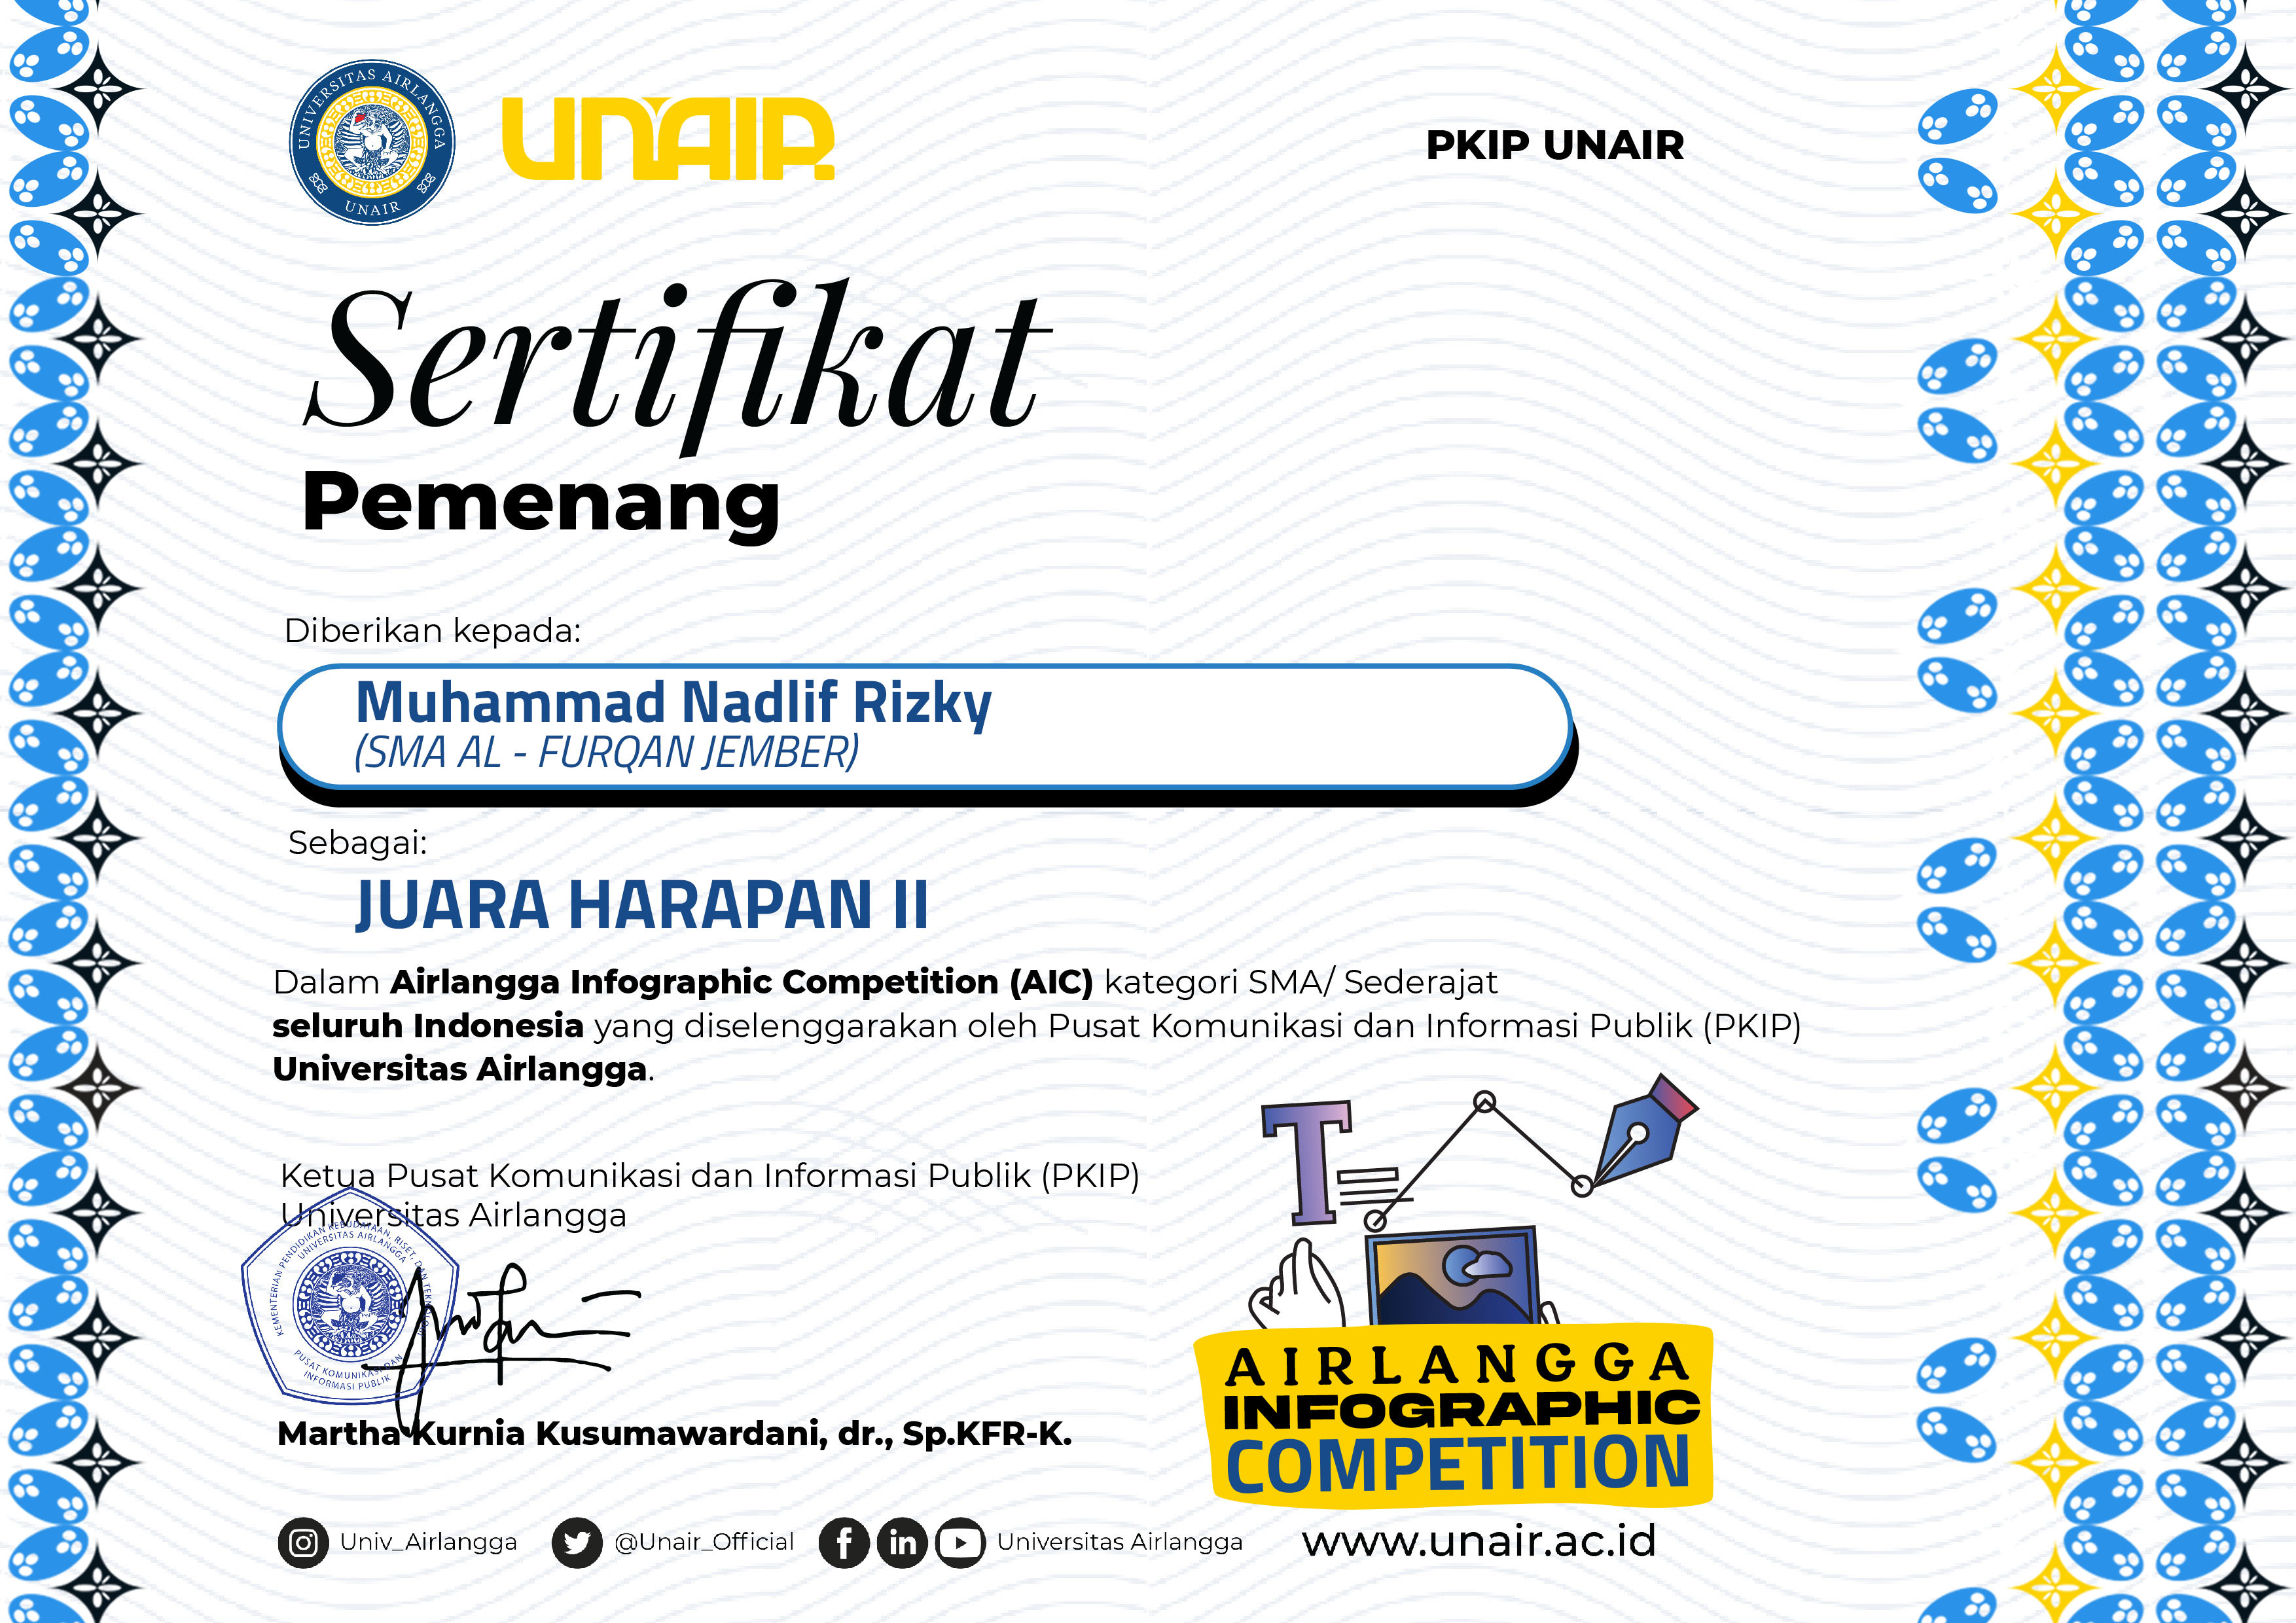 Airlangga Infographic Competition 2023